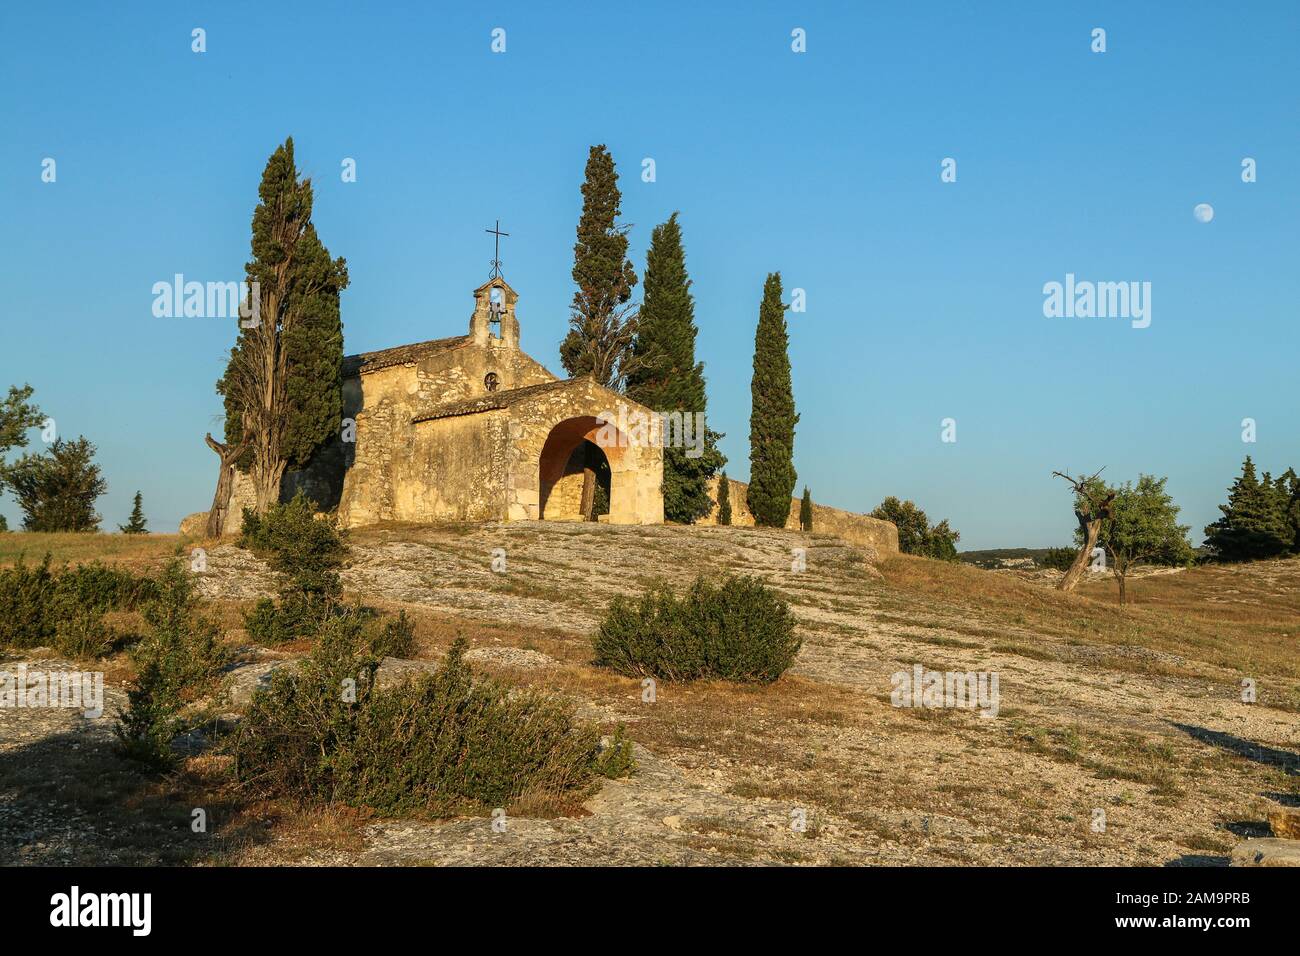 A Picture of the old Saint Sixte chapel in Provance in France. Stock Photo